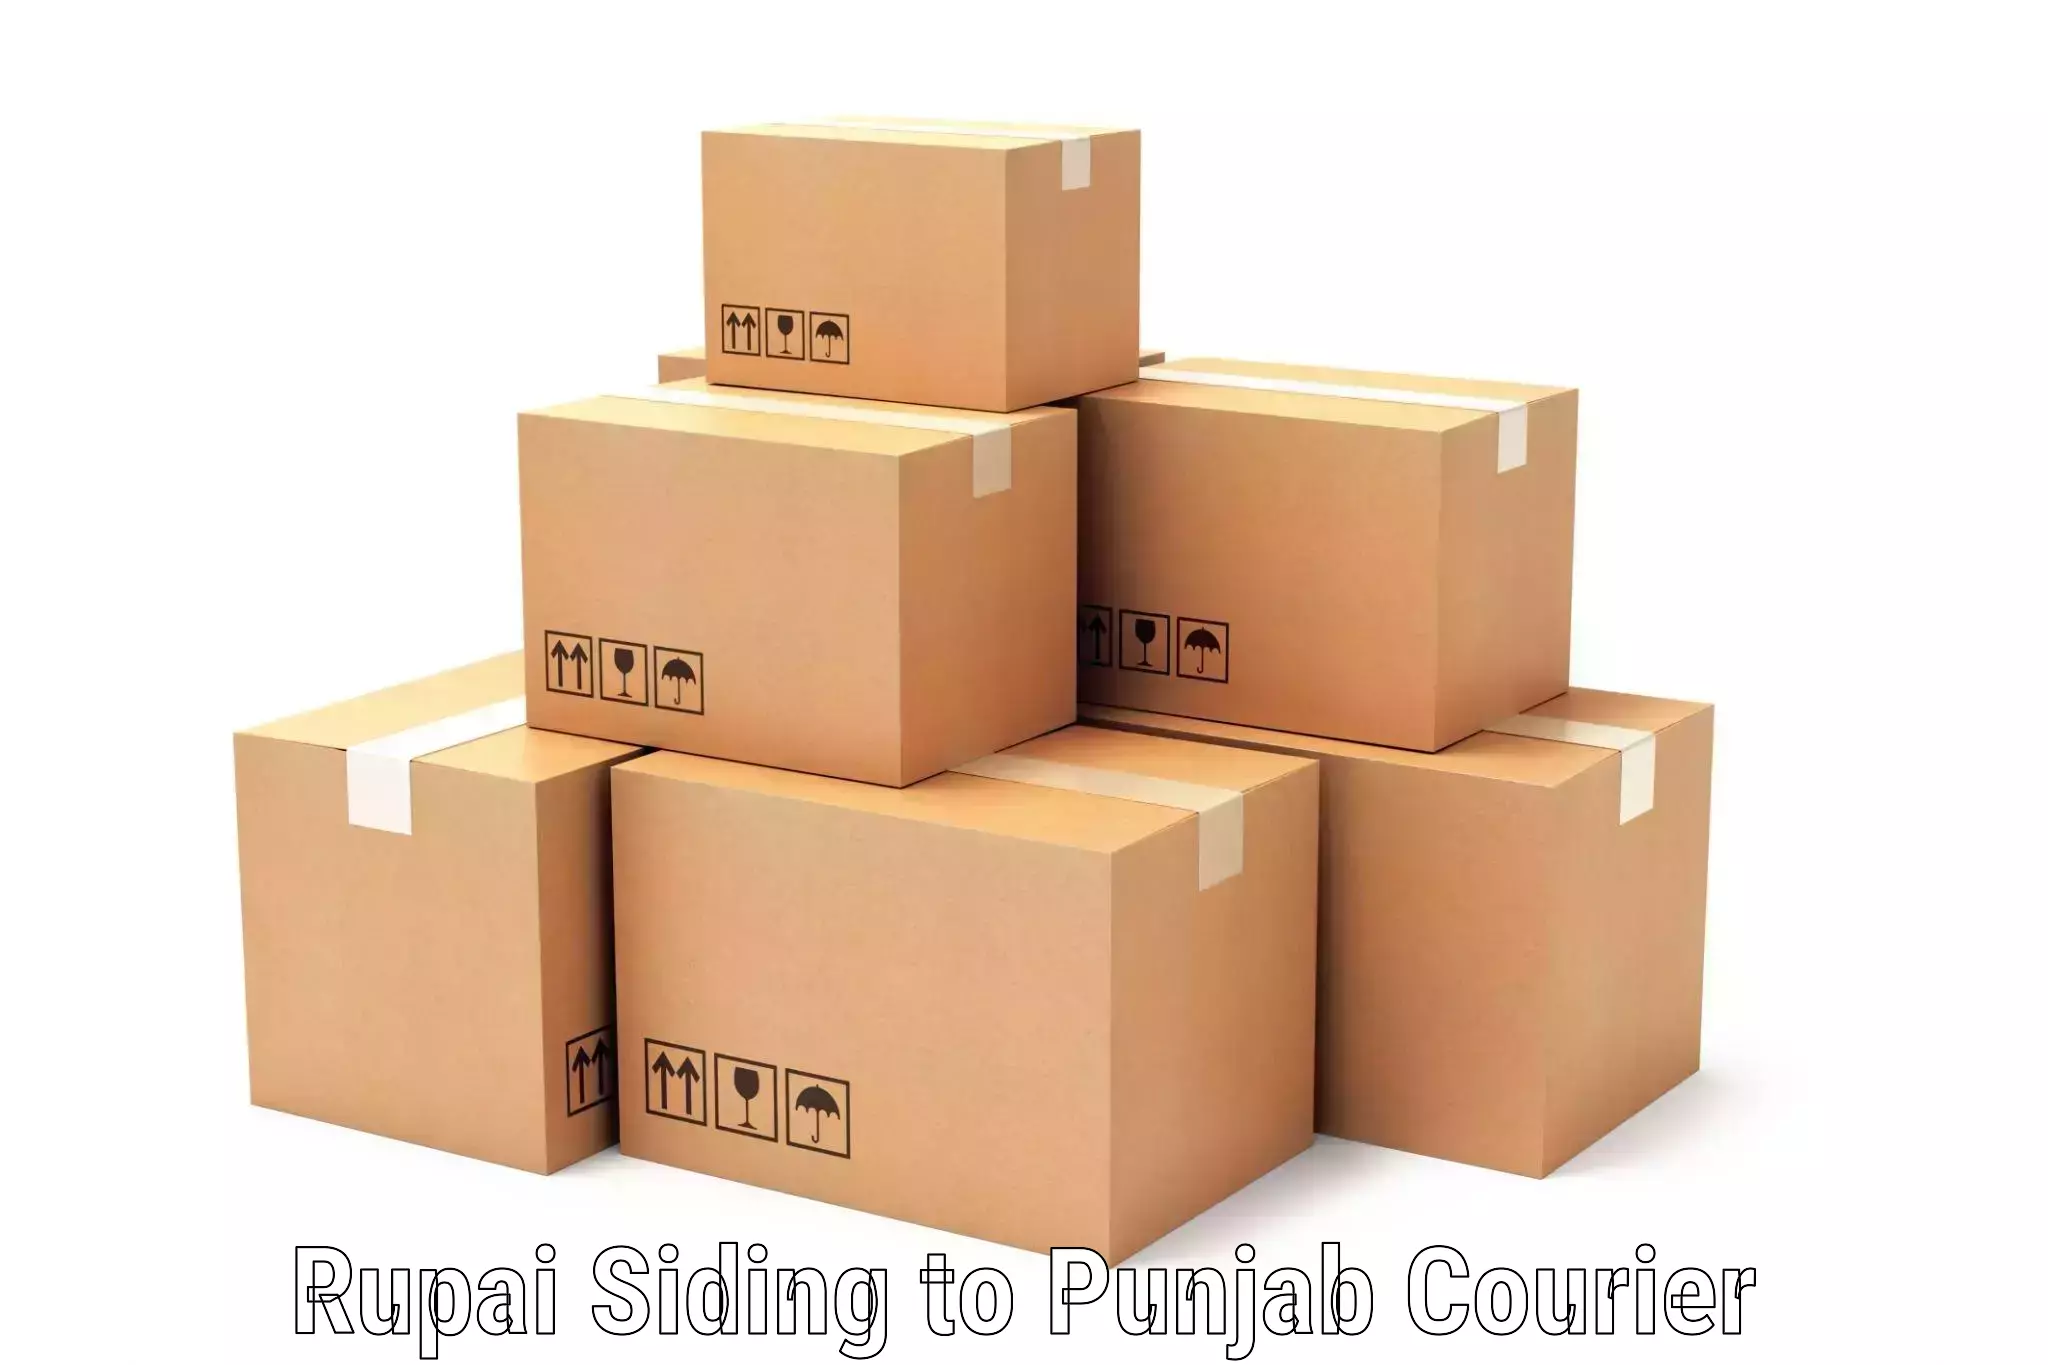 Courier service efficiency in Rupai Siding to Central University of Punjab Bathinda